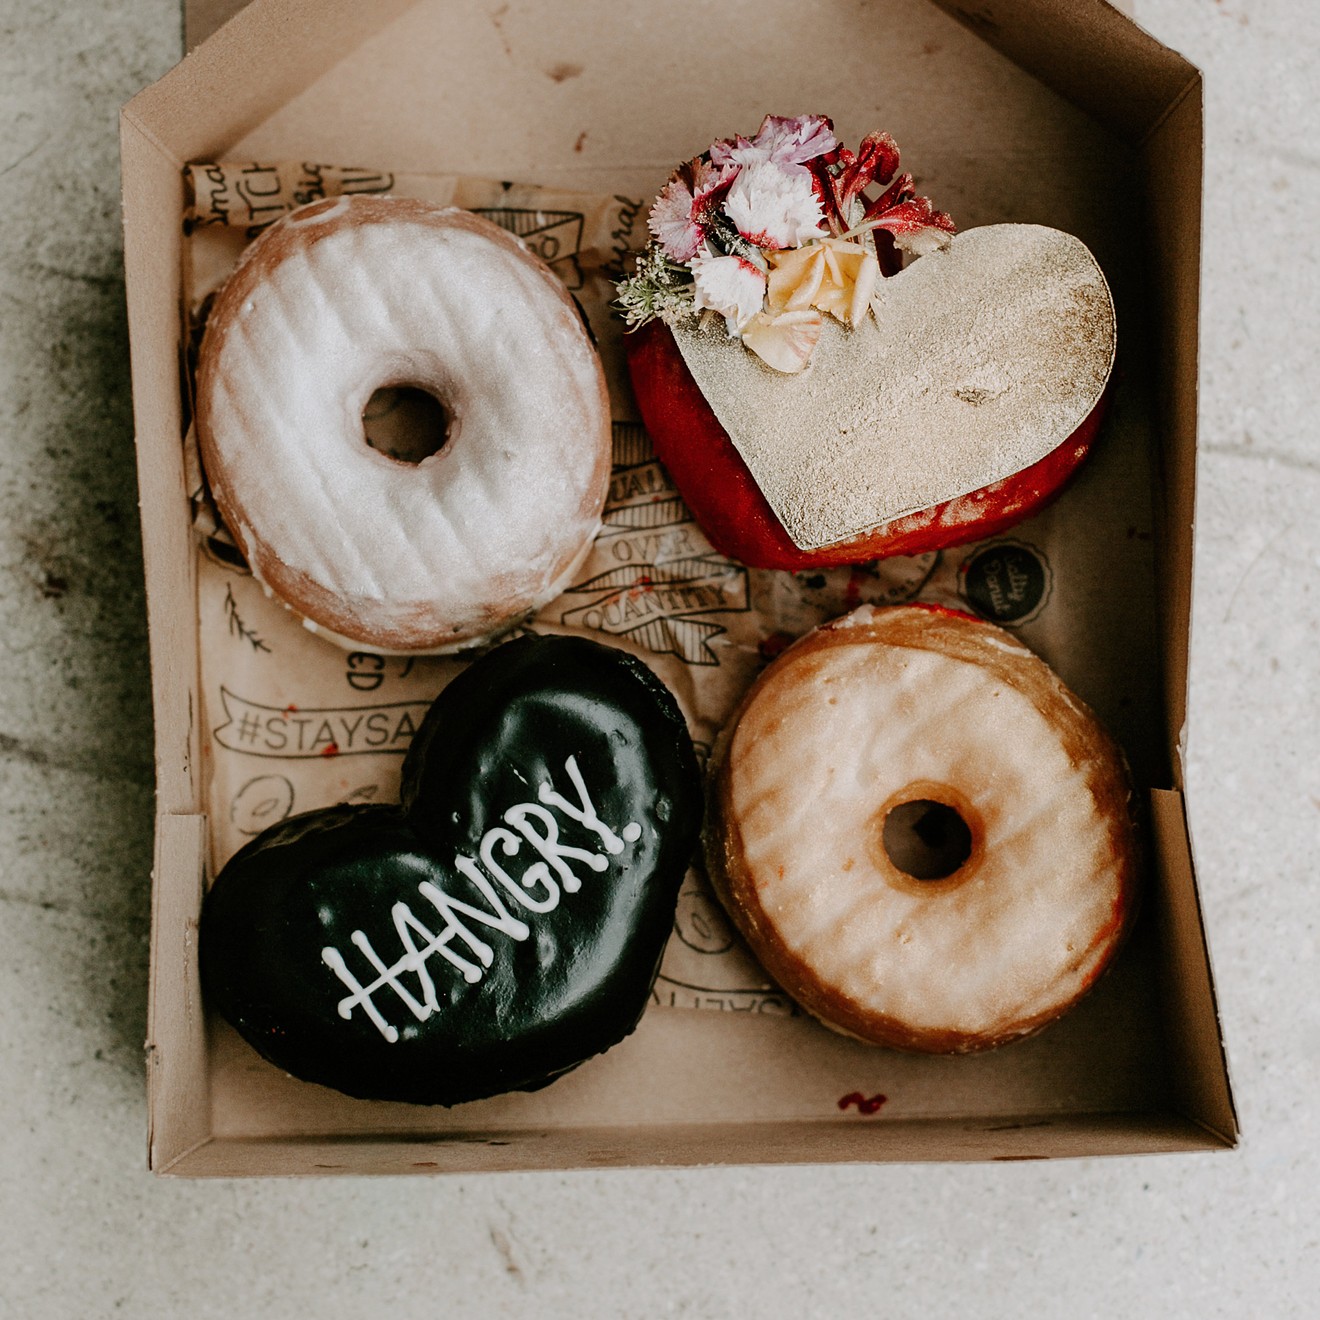 The "It's Complicated" box from the Salty Donut.